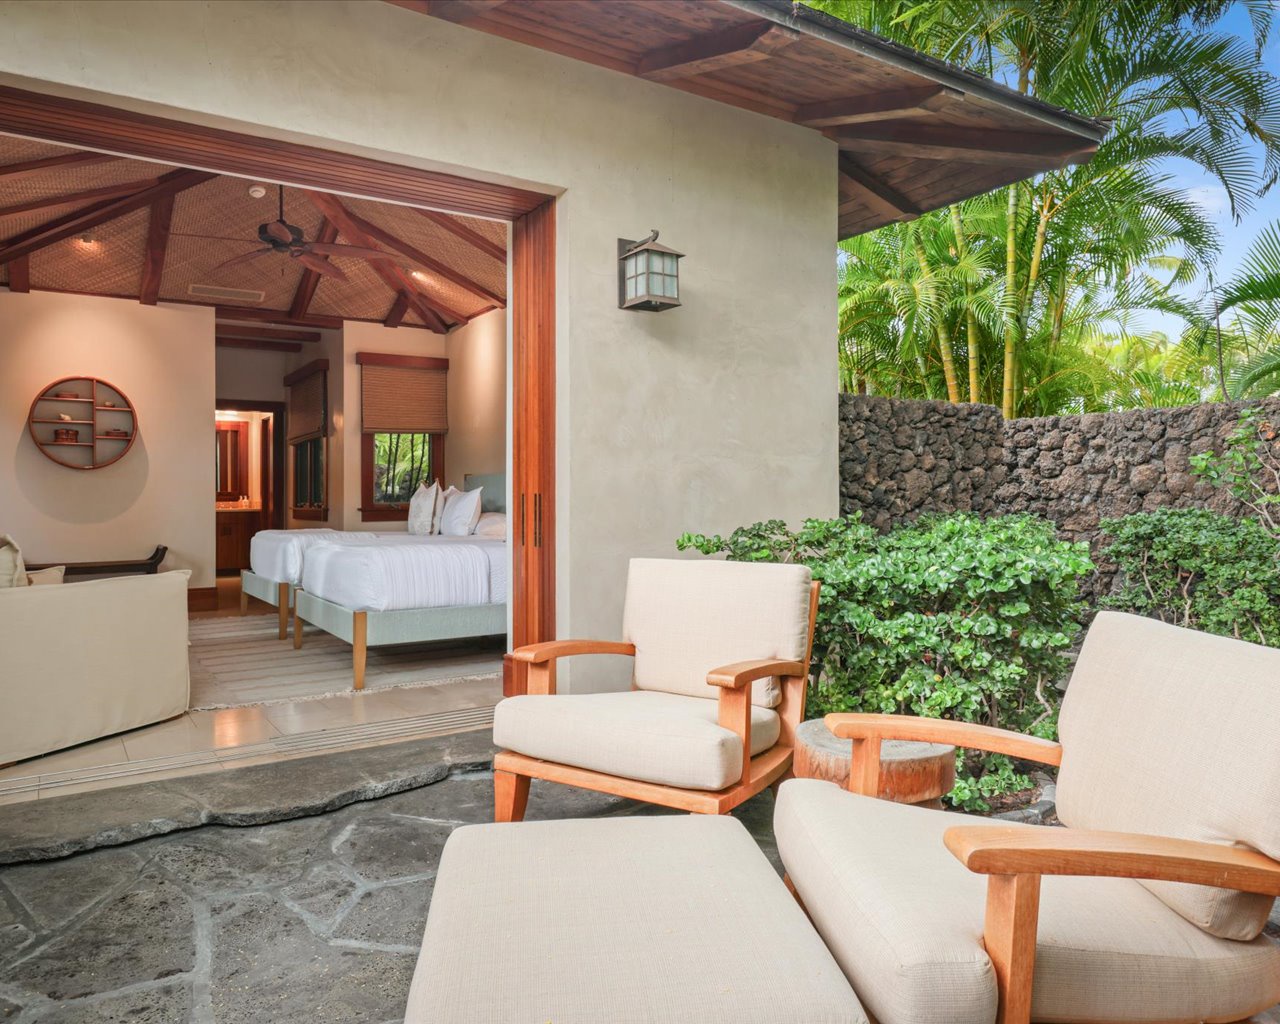 Kailua Kona Vacation Rentals, 3BD Pakui Street (131) Estate Home at Four Seasons Resort at Hualalai - Lanai exclusive to the second bedroom to take in the greenery